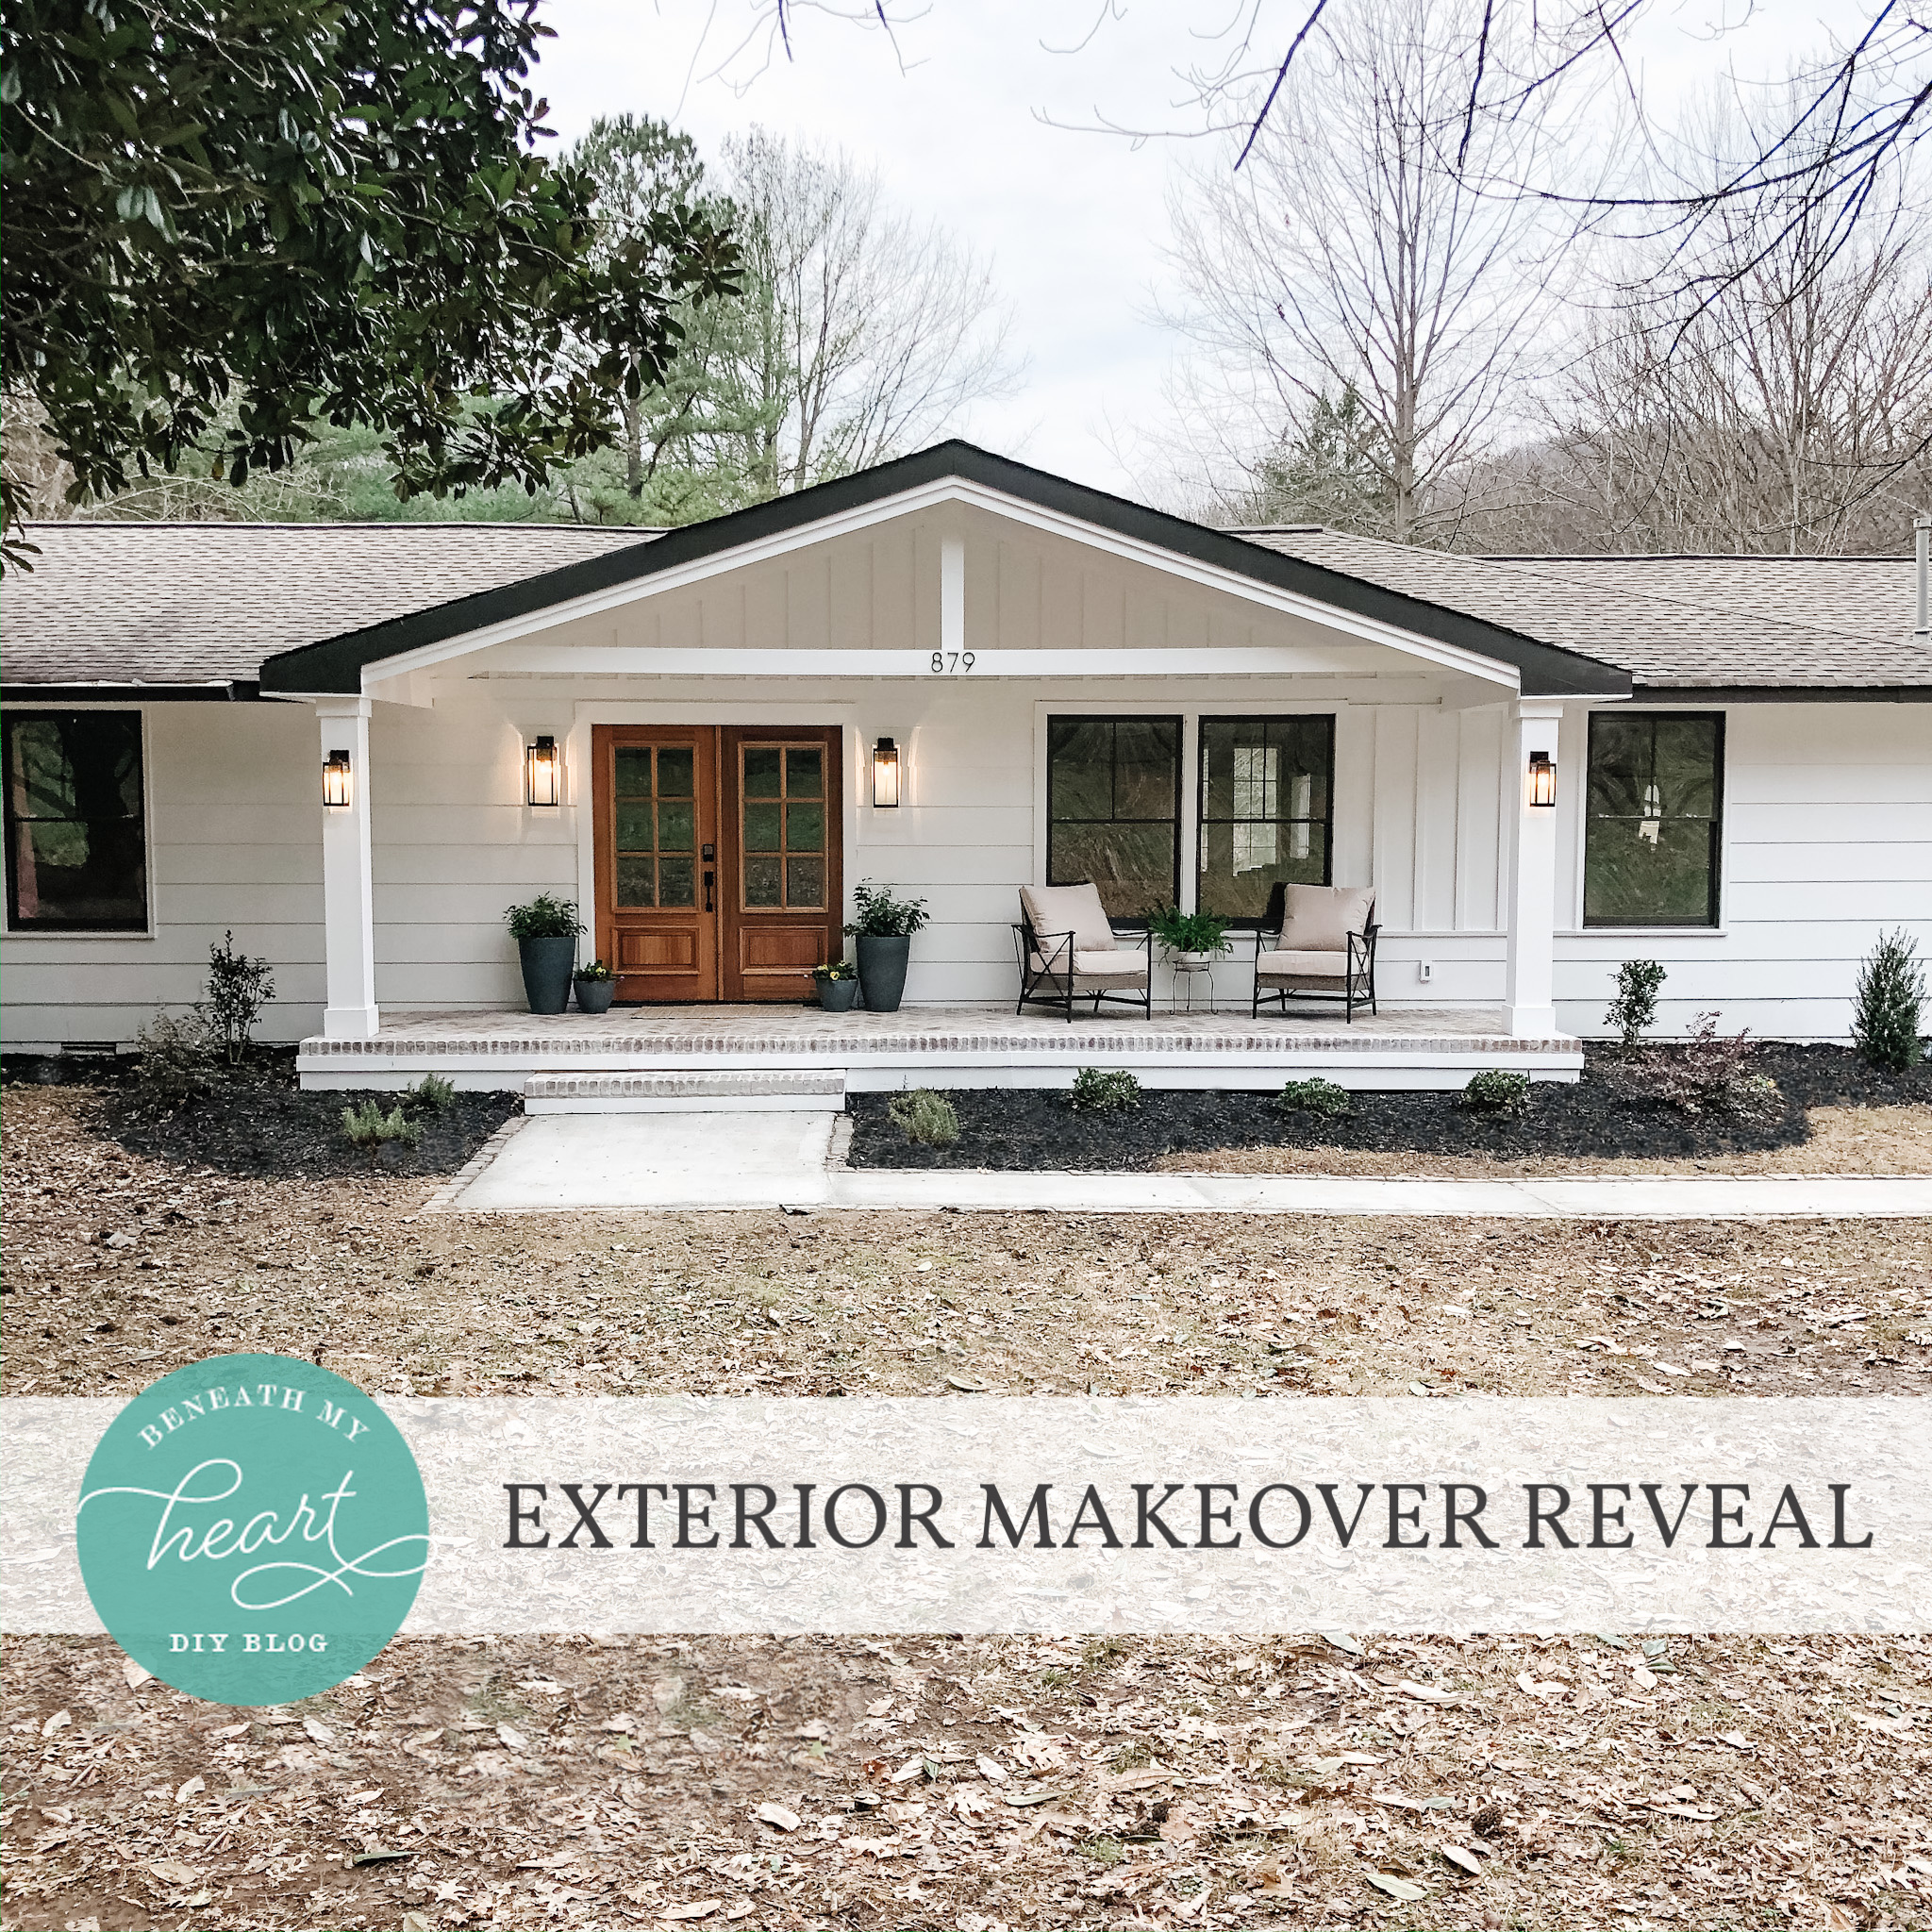 Exterior Makeover Reveal!!! {Notes from Home}